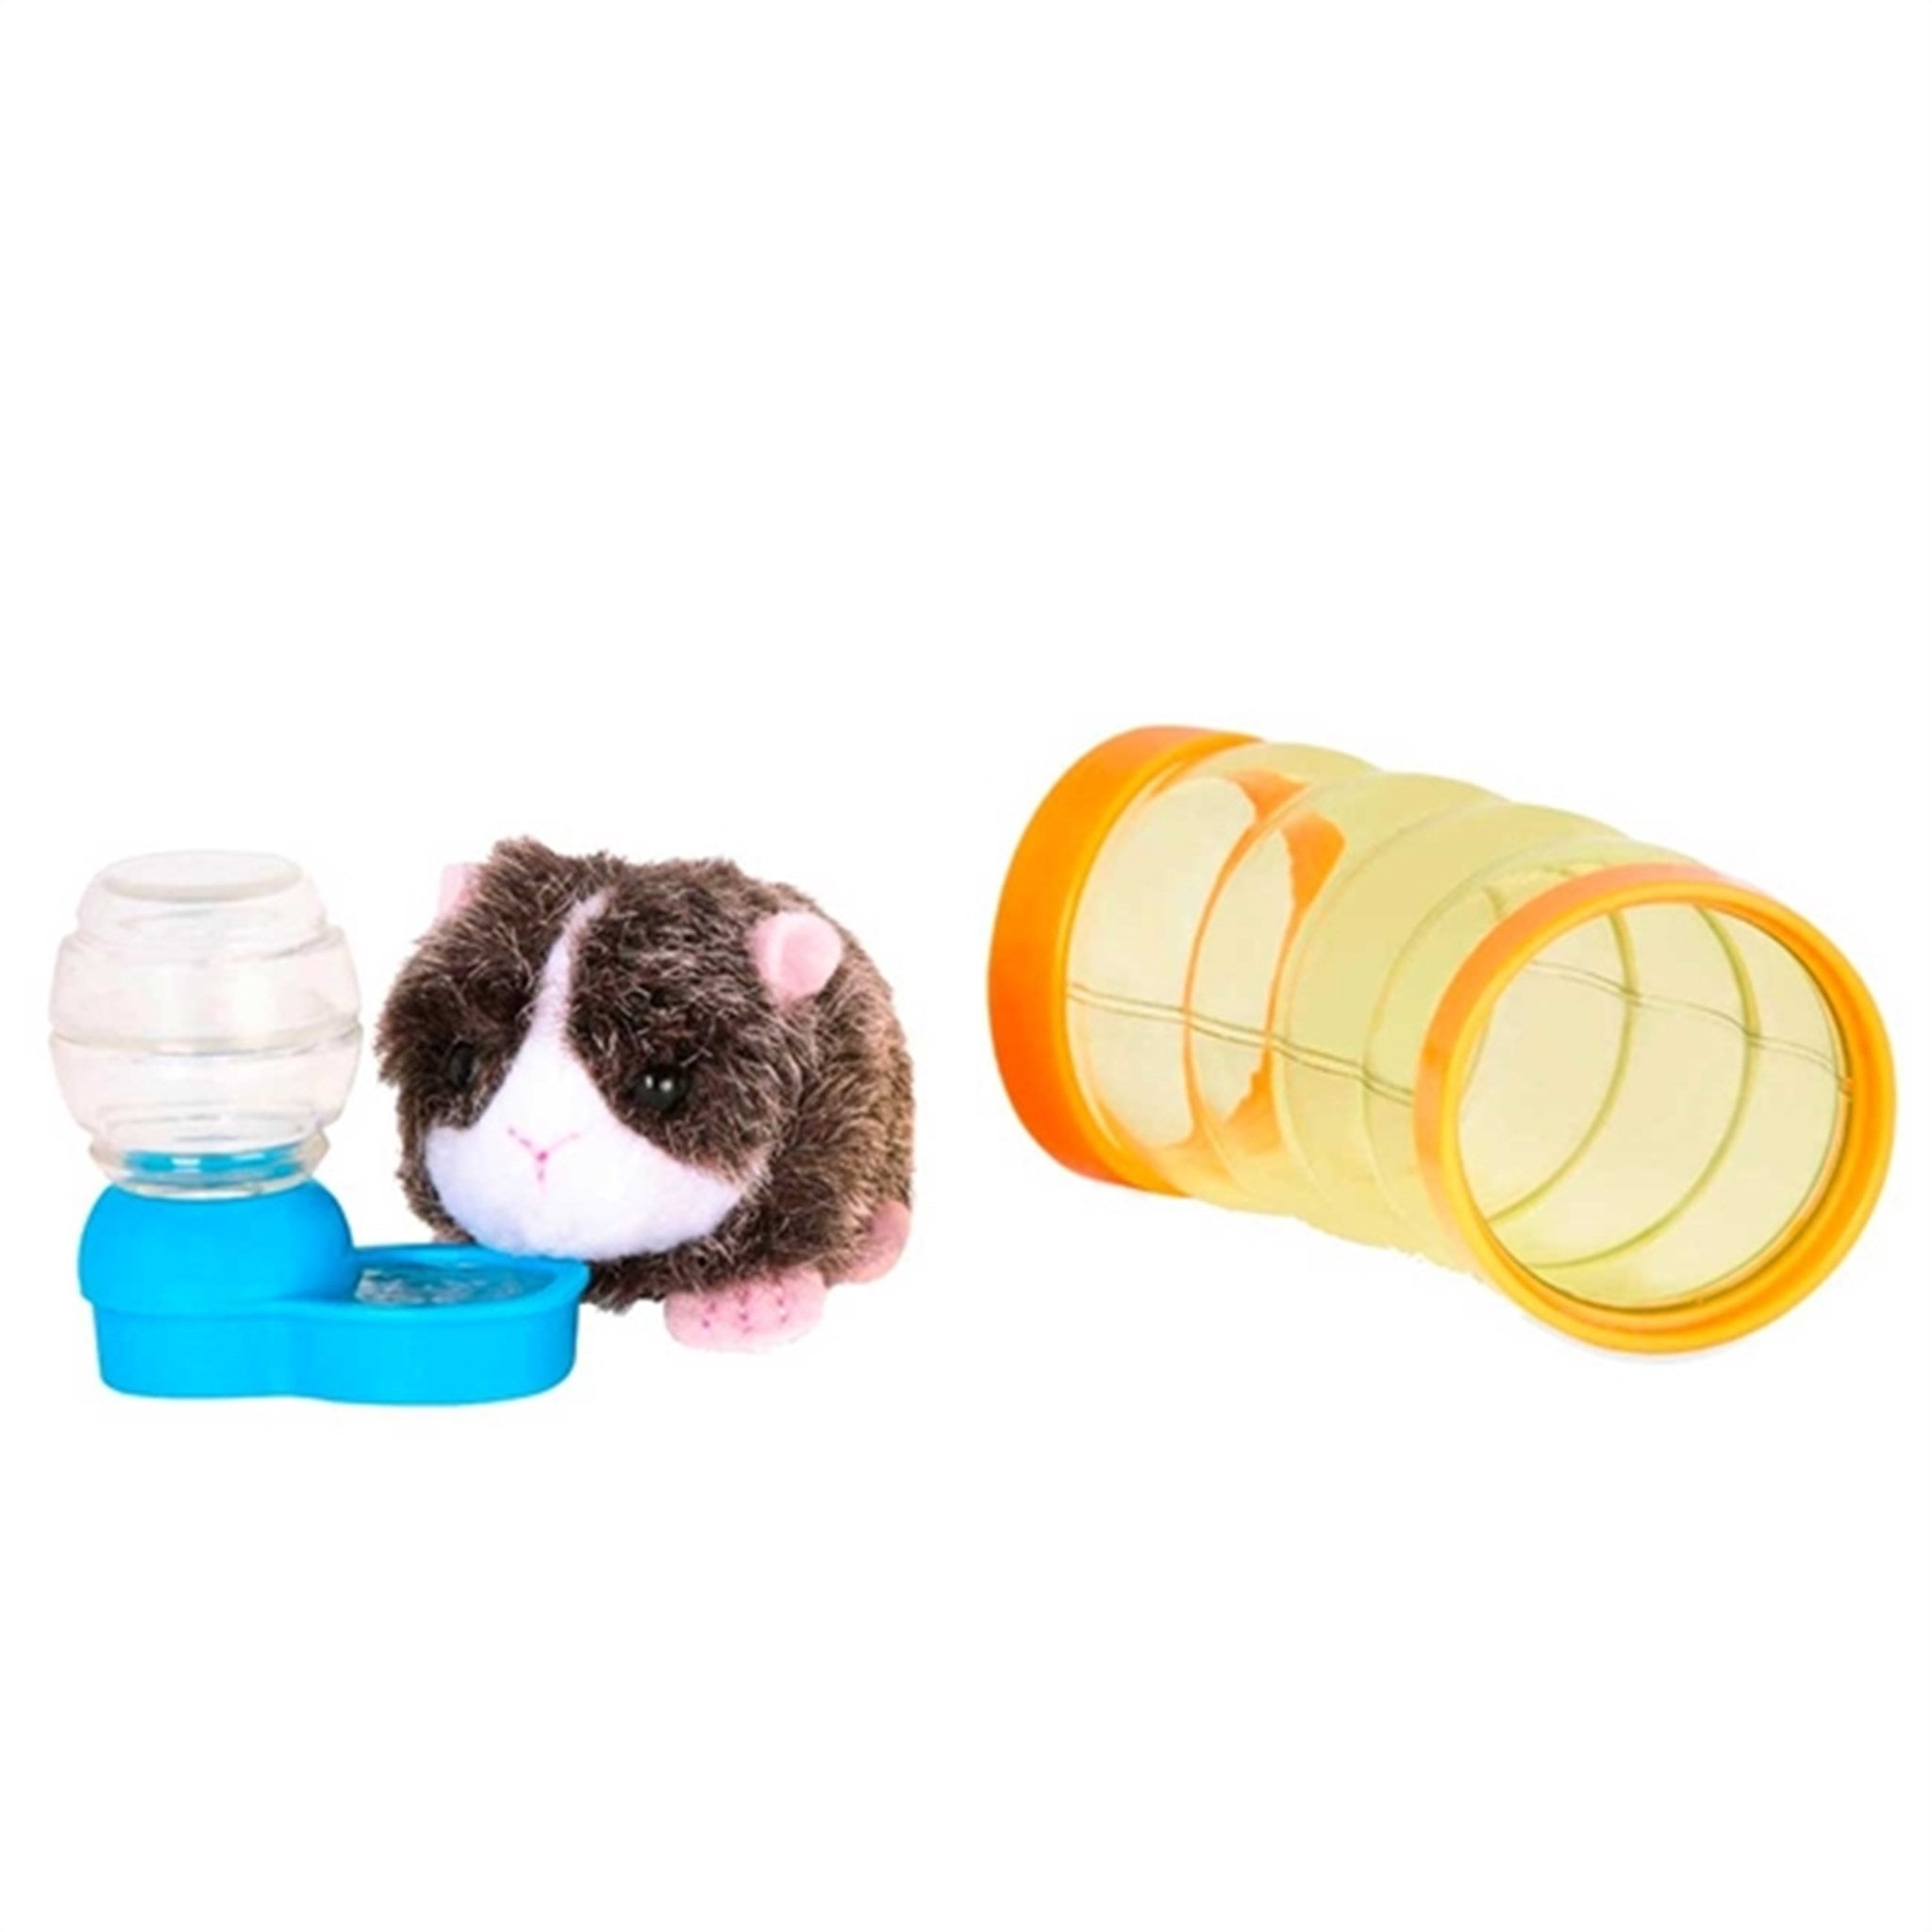 Our Generation Doll Accessories - Pet Guinea Pig